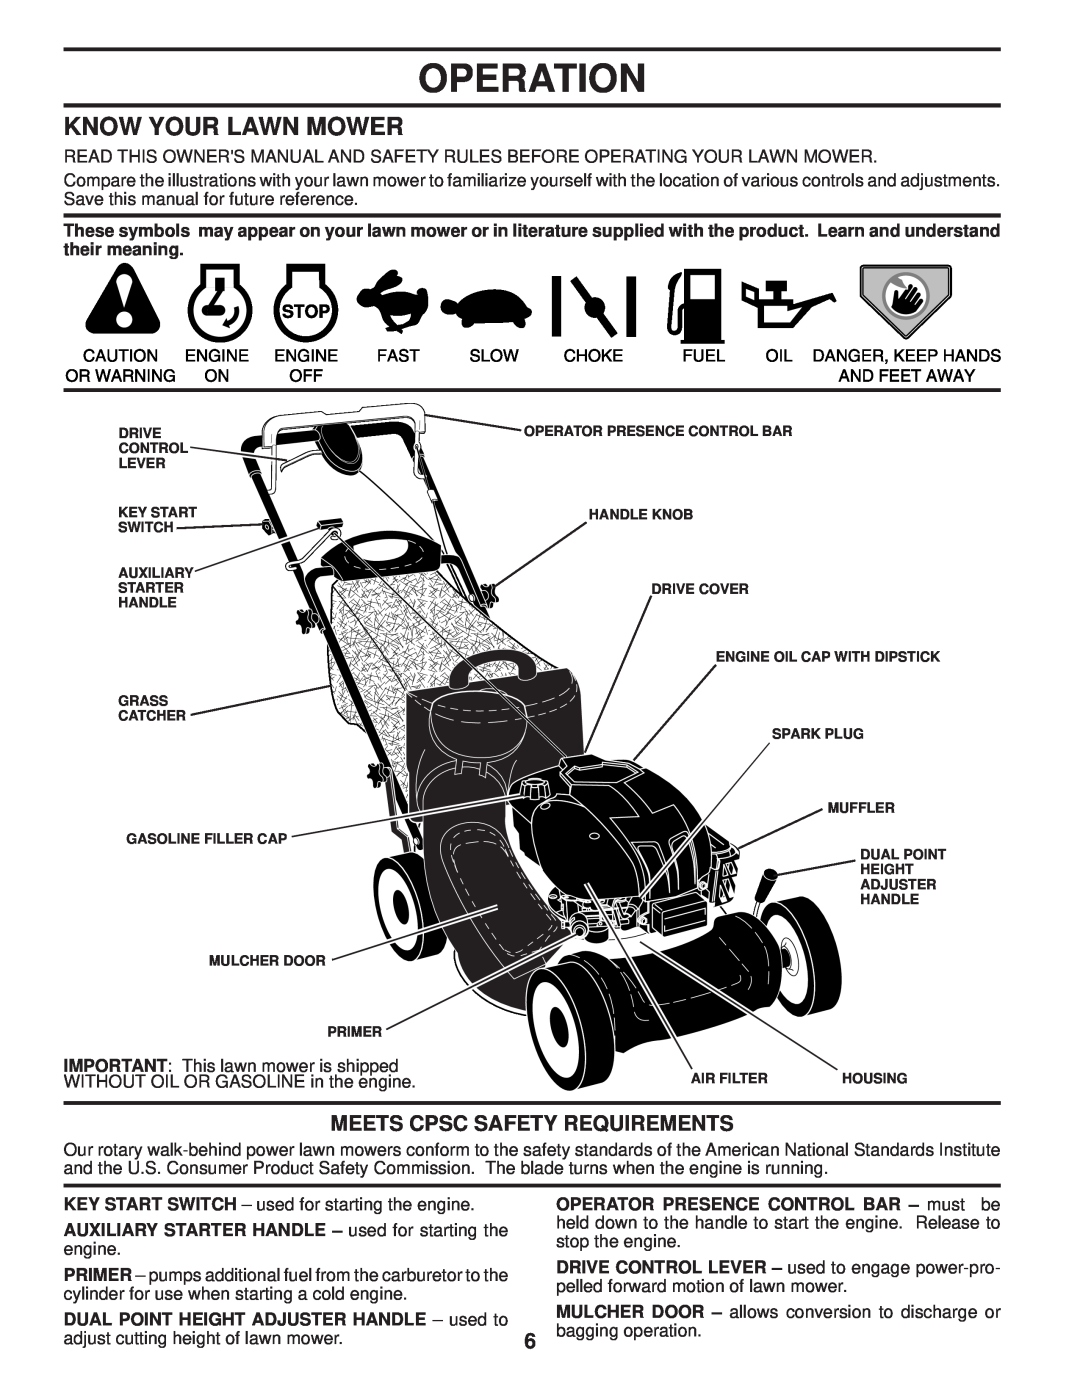 Husqvarna 87521HVE owner manual Operation, Know Your Lawn Mower, Meets Cpsc Safety Requirements 